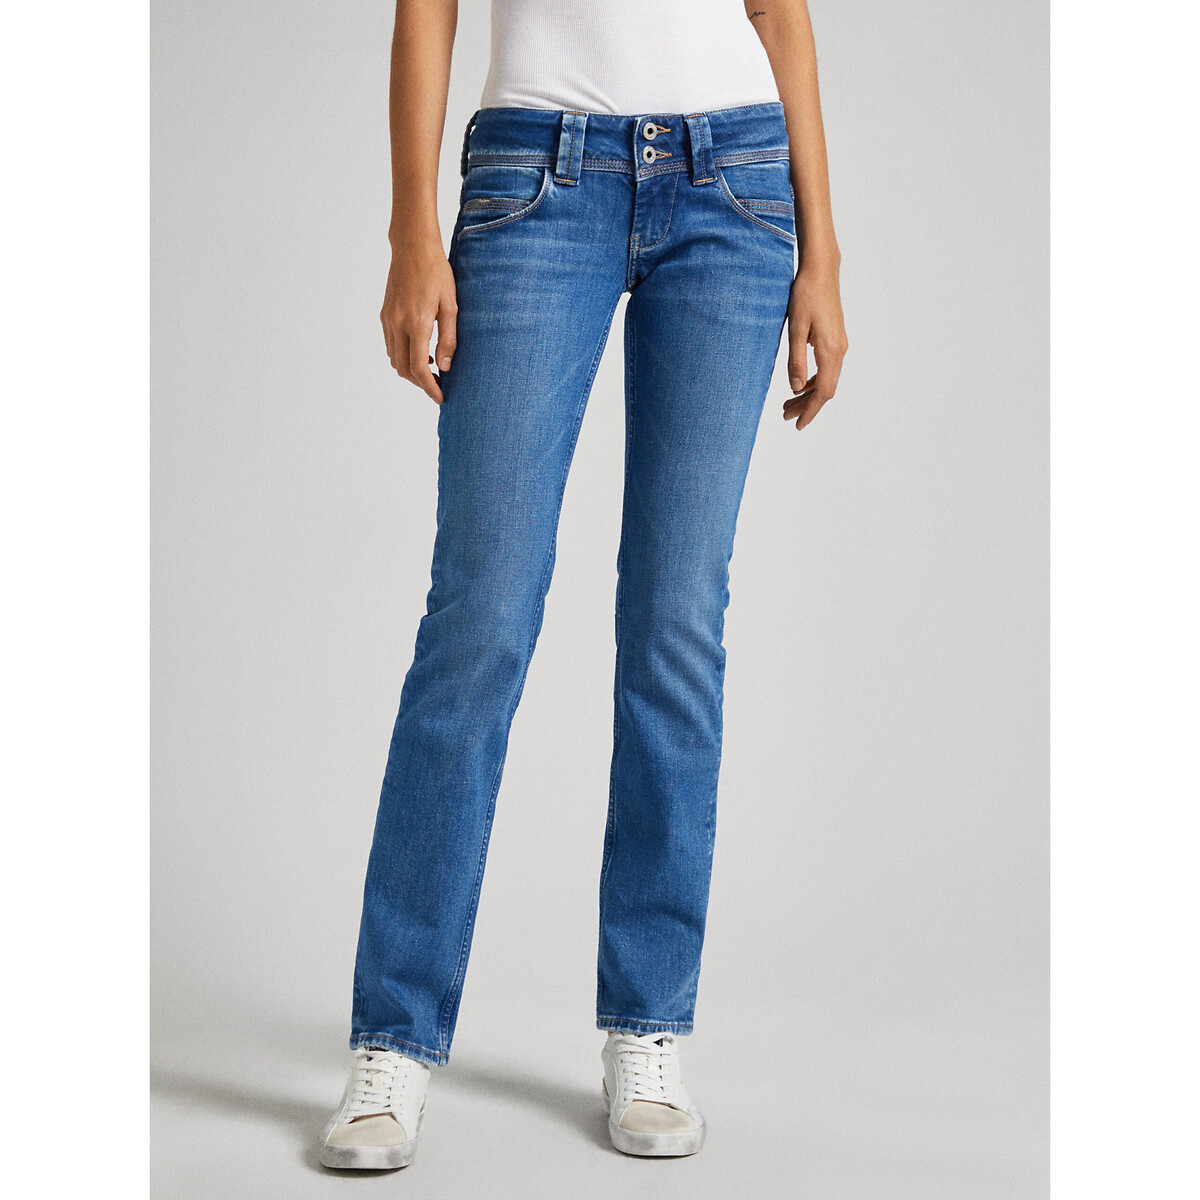 Slim jeans, lage taille-Pepe Jeans 1